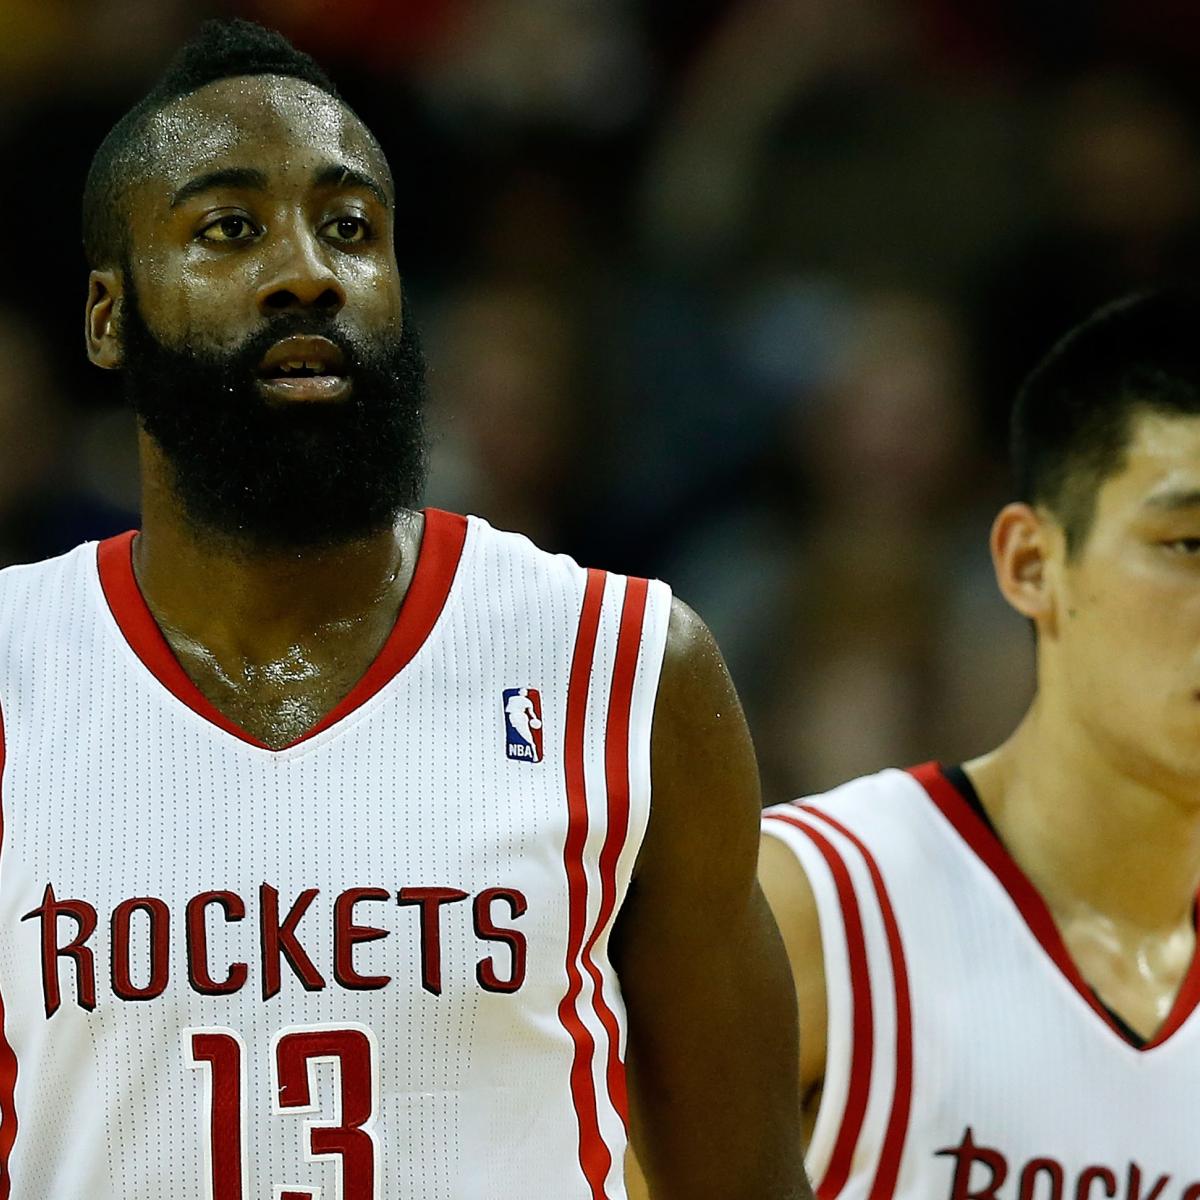 Bleacher Report Says the Houston Rockets Have the Second-Best